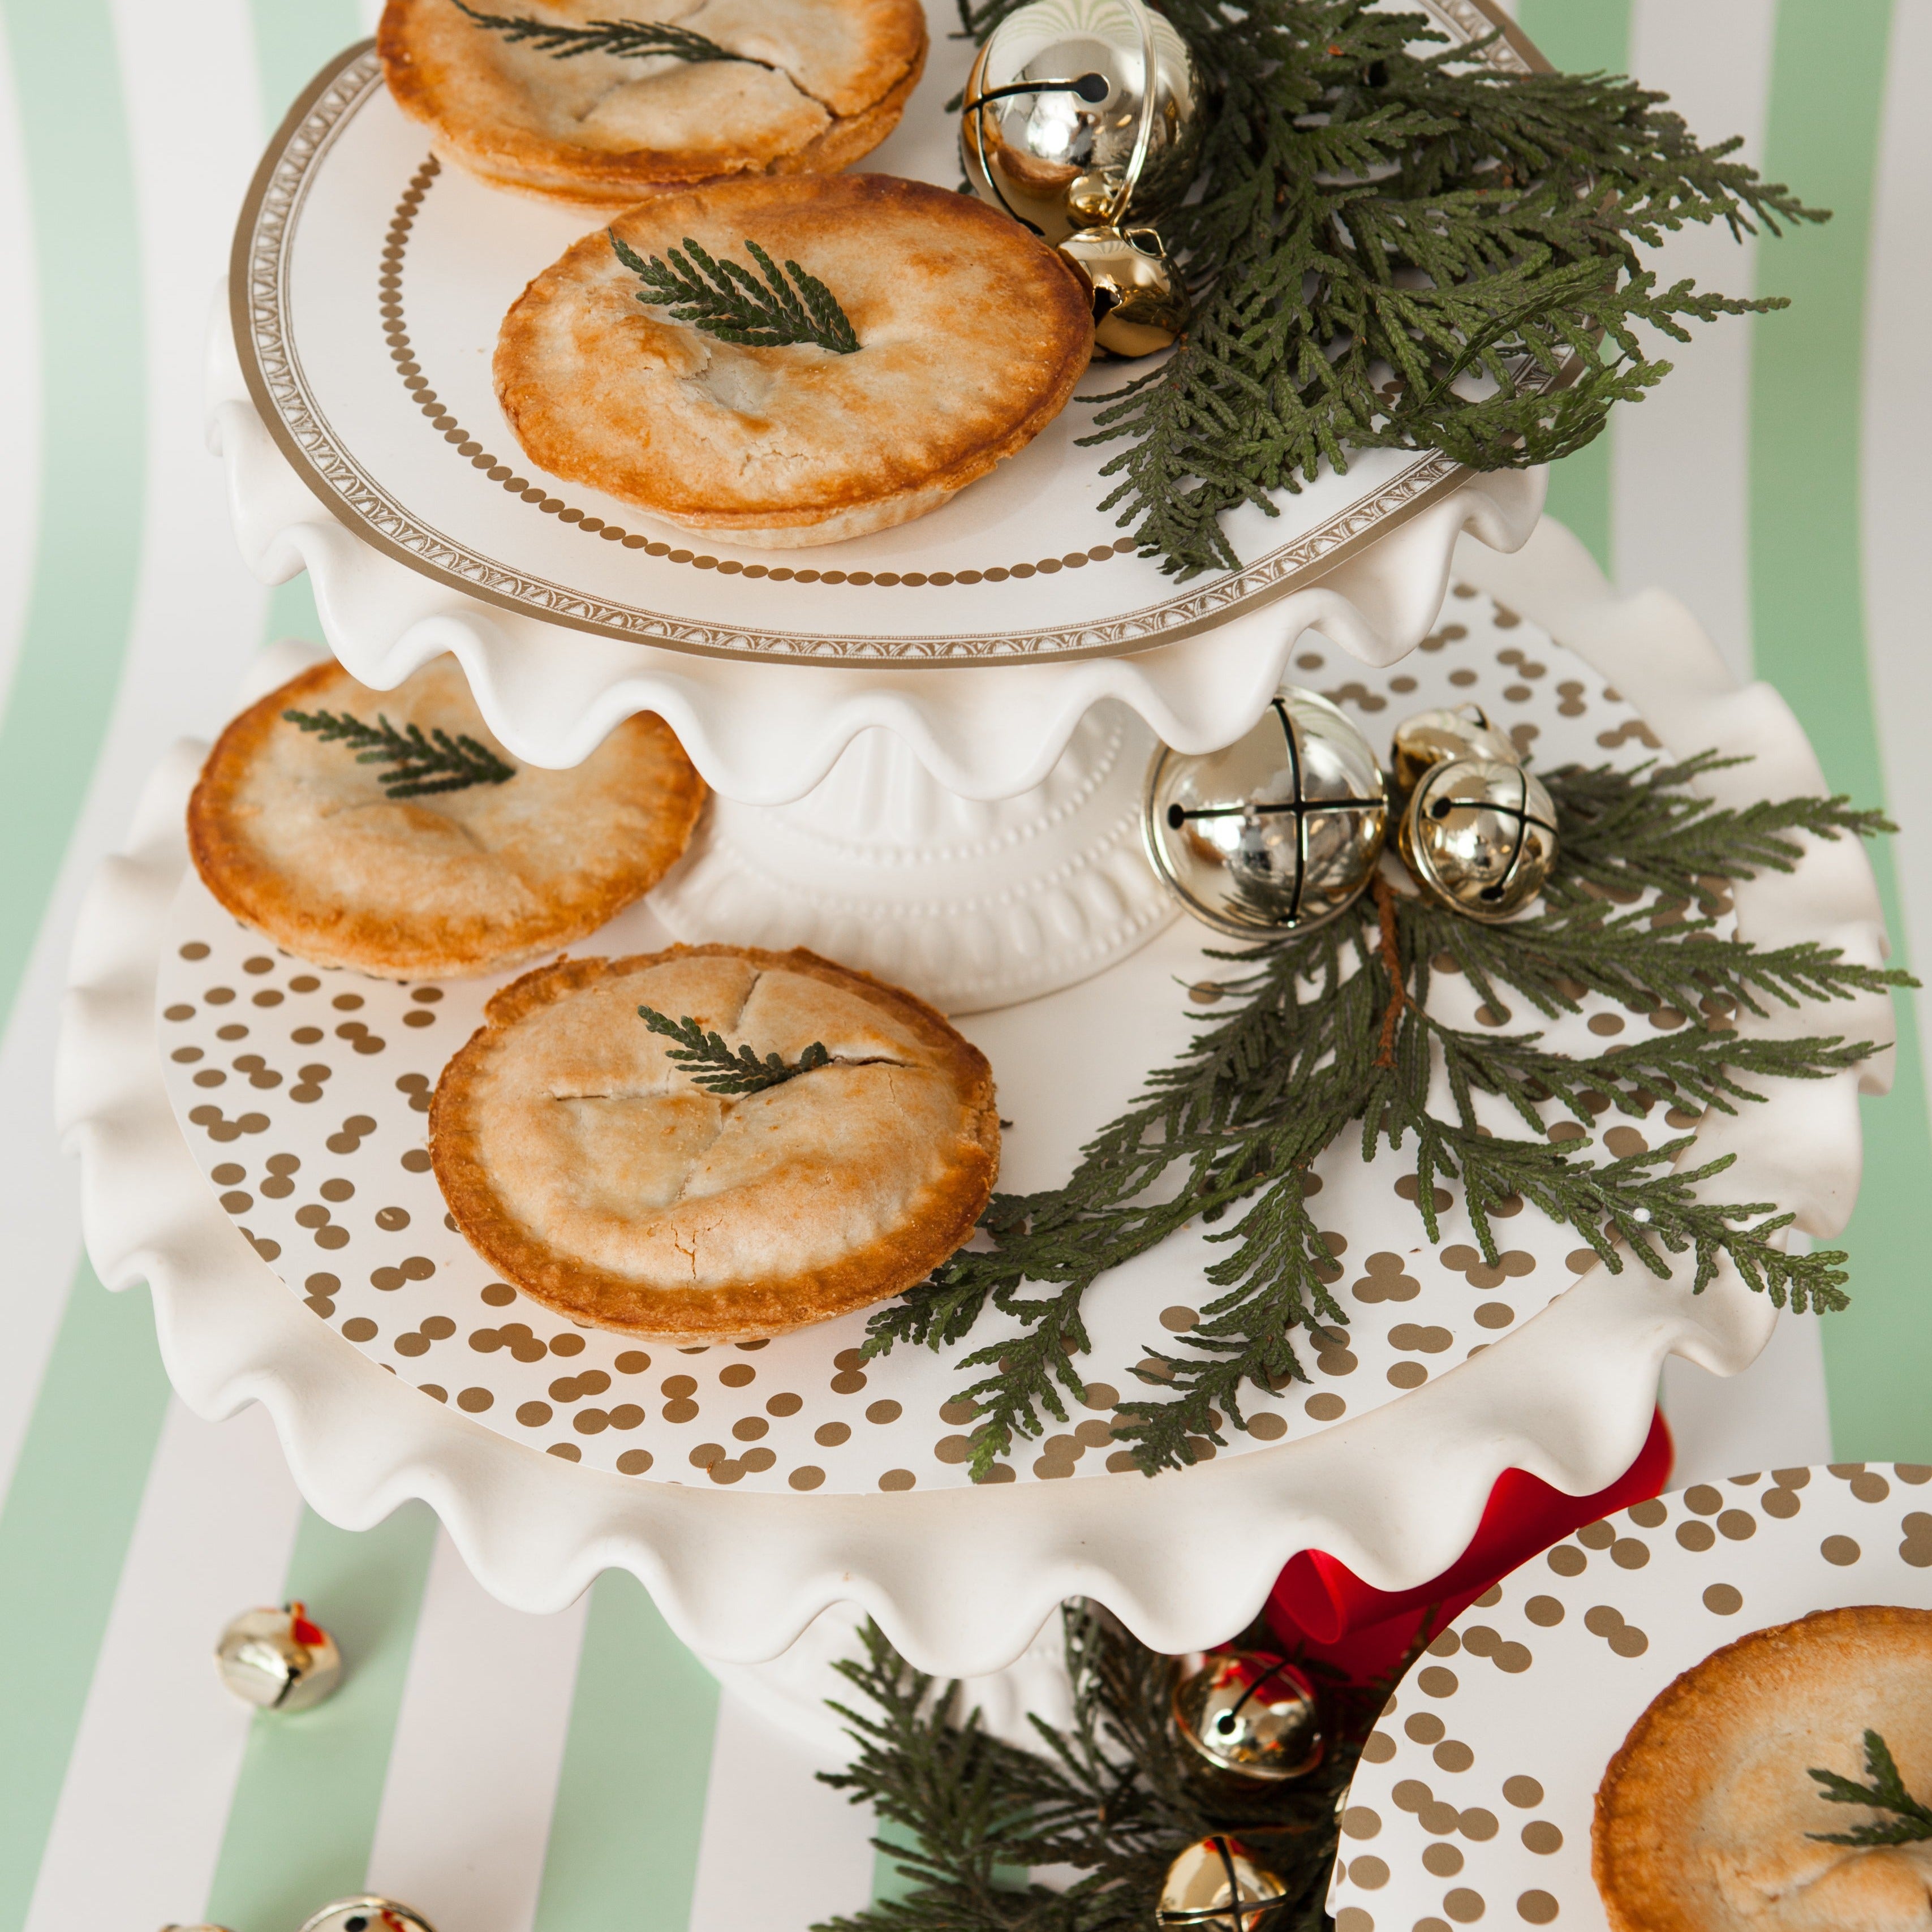 A festive holiday treat table featuring Gold Serving Papers on the cake stands.